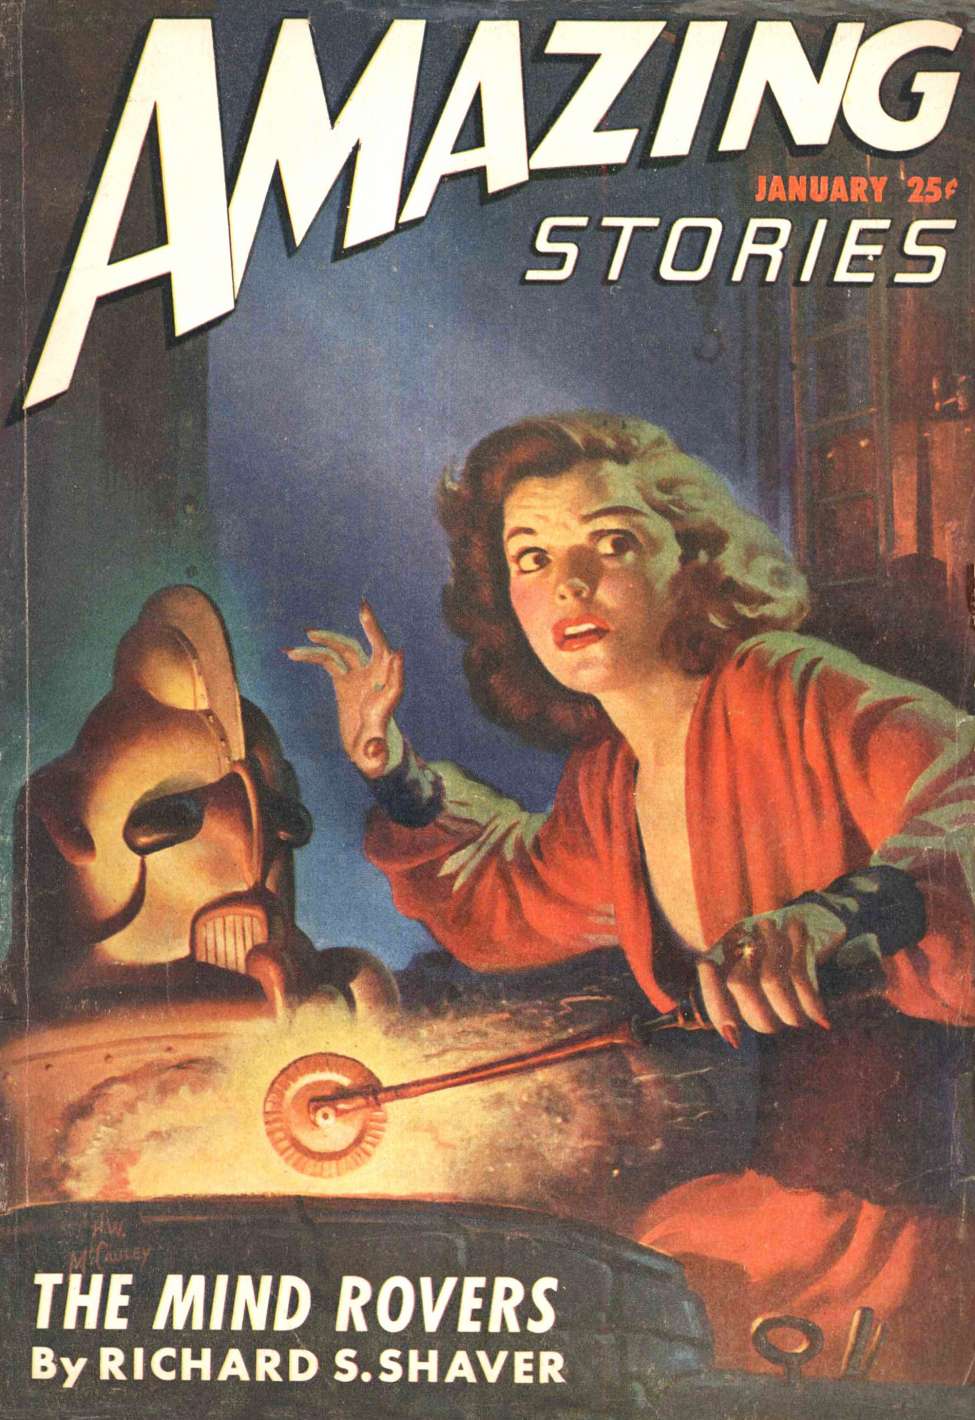 Book Cover For Amazing Stories v21 1 - The Mind Rovers - Richard S. Shaver